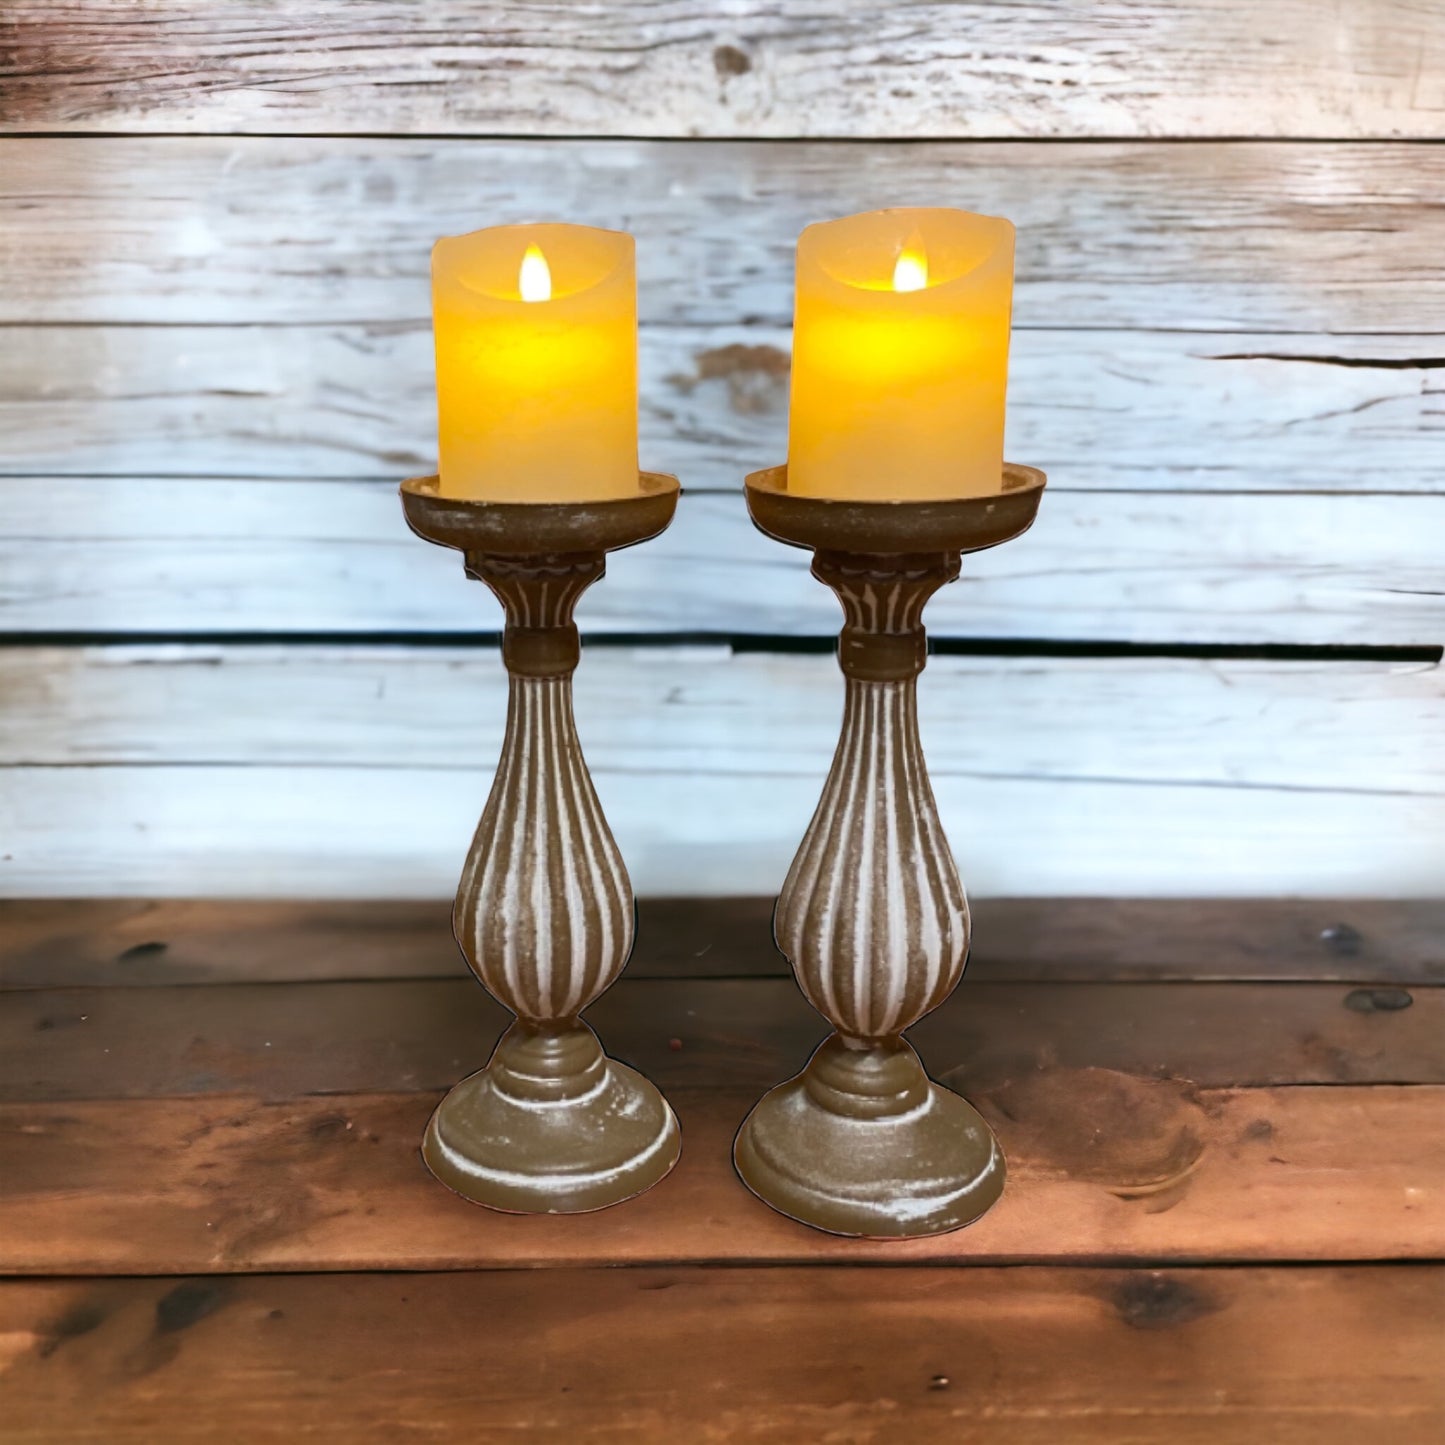 Candle Holder Pillar Rustic Set of 2 - The Renmy Store Homewares & Gifts 